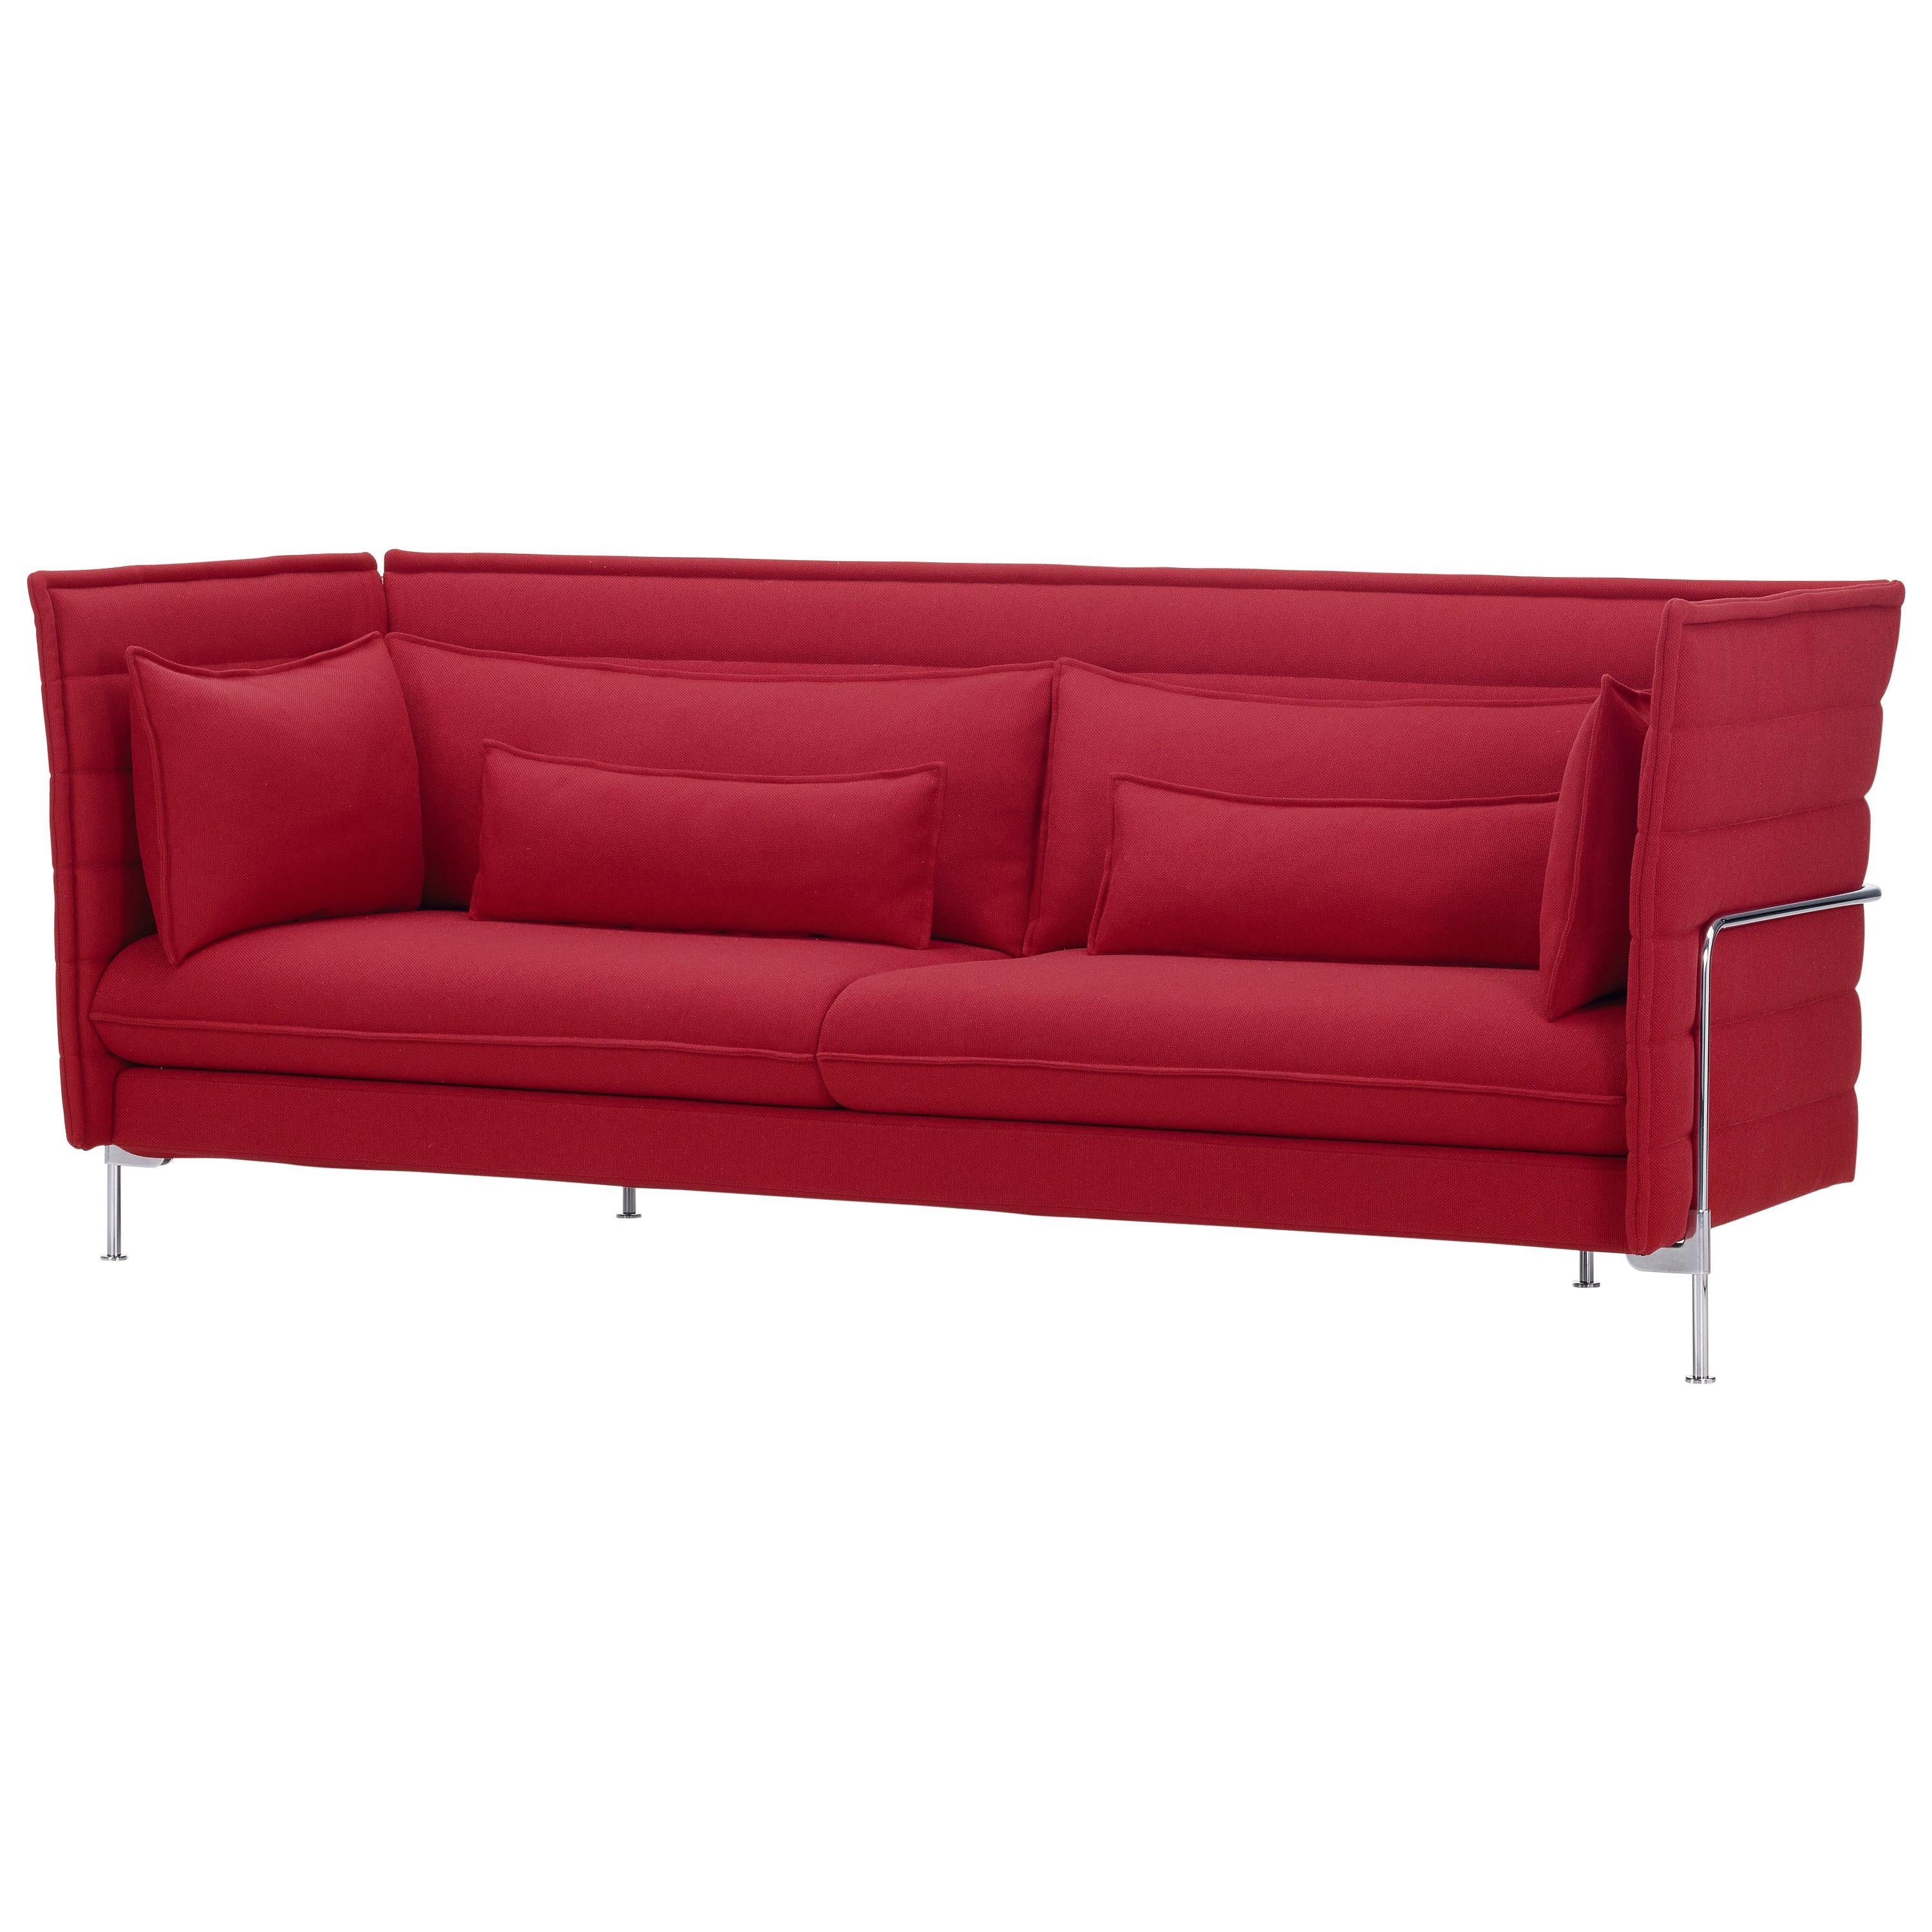 Vitra Alcove 3-Seater Sofa in Dark Red Laser by Ronan & Erwan Bouroullec For Sale